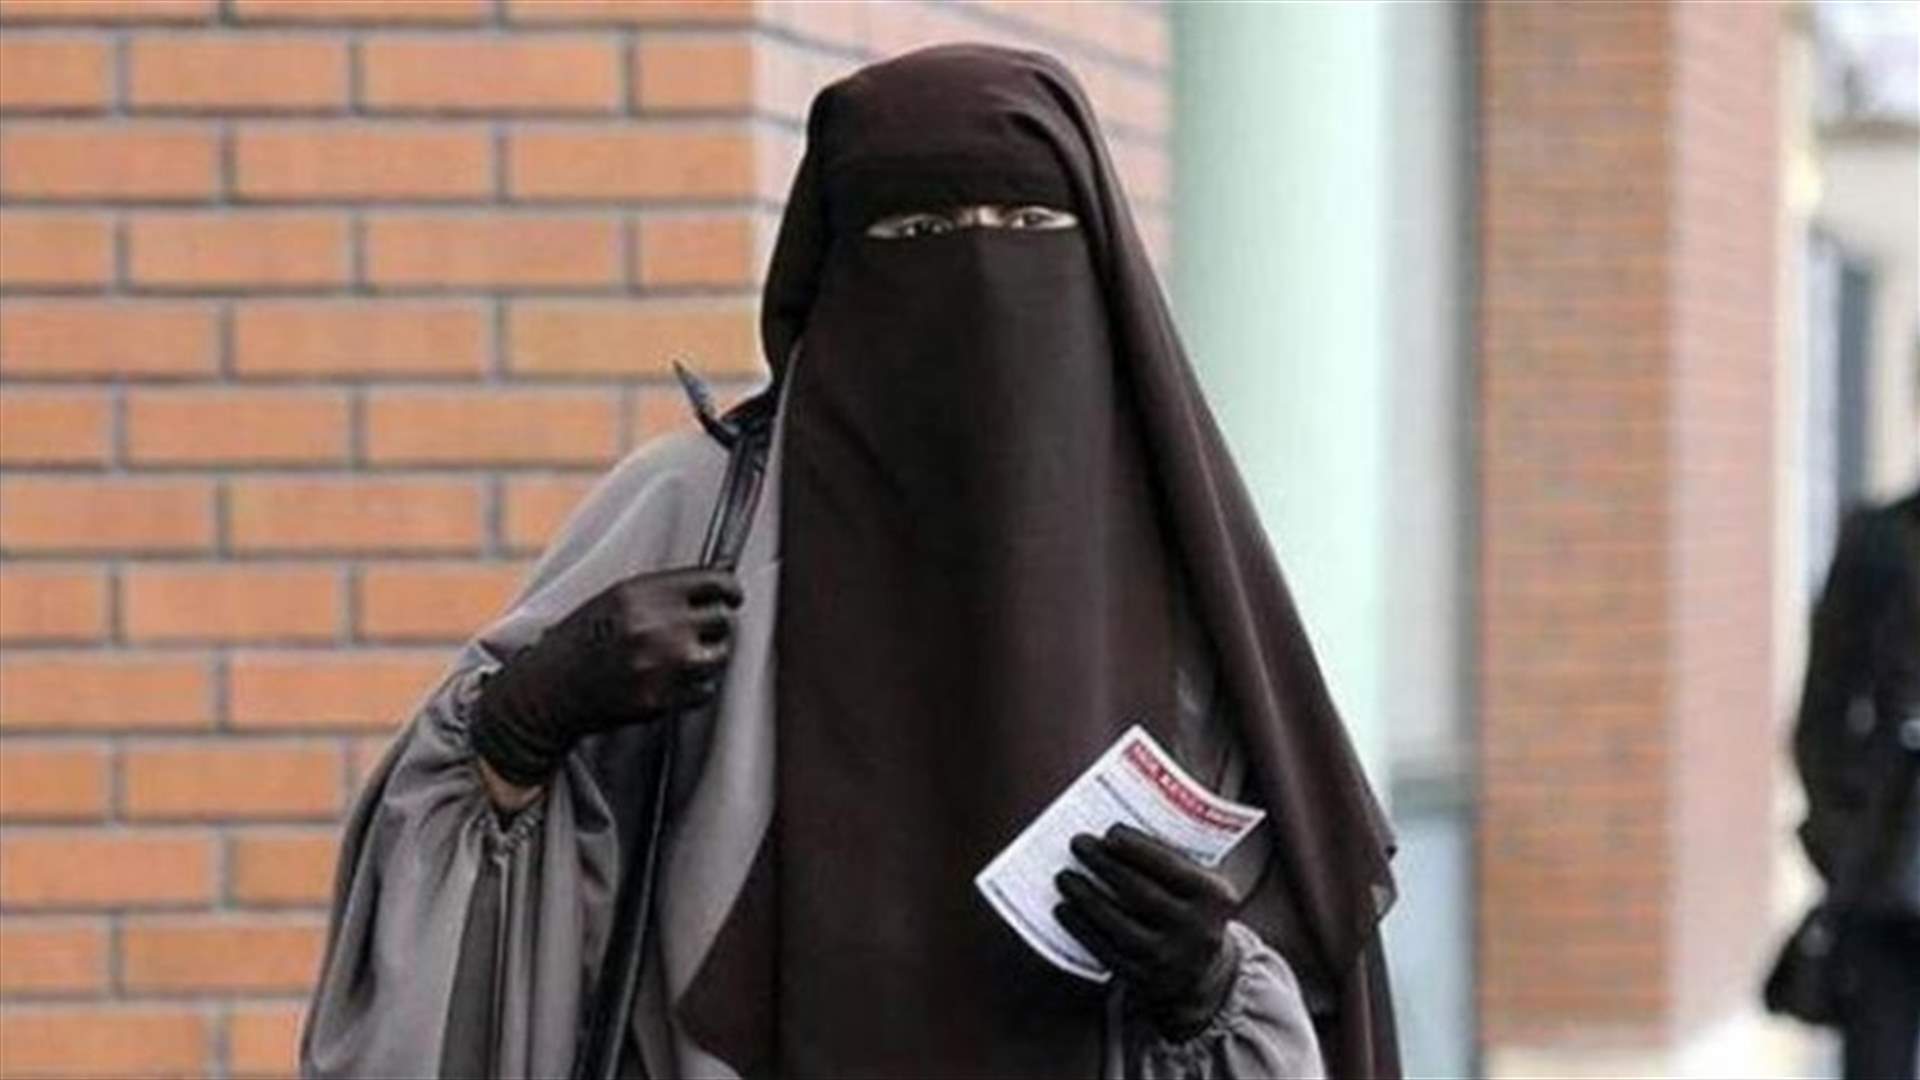 Swiss canton becomes second to ban burqas in public